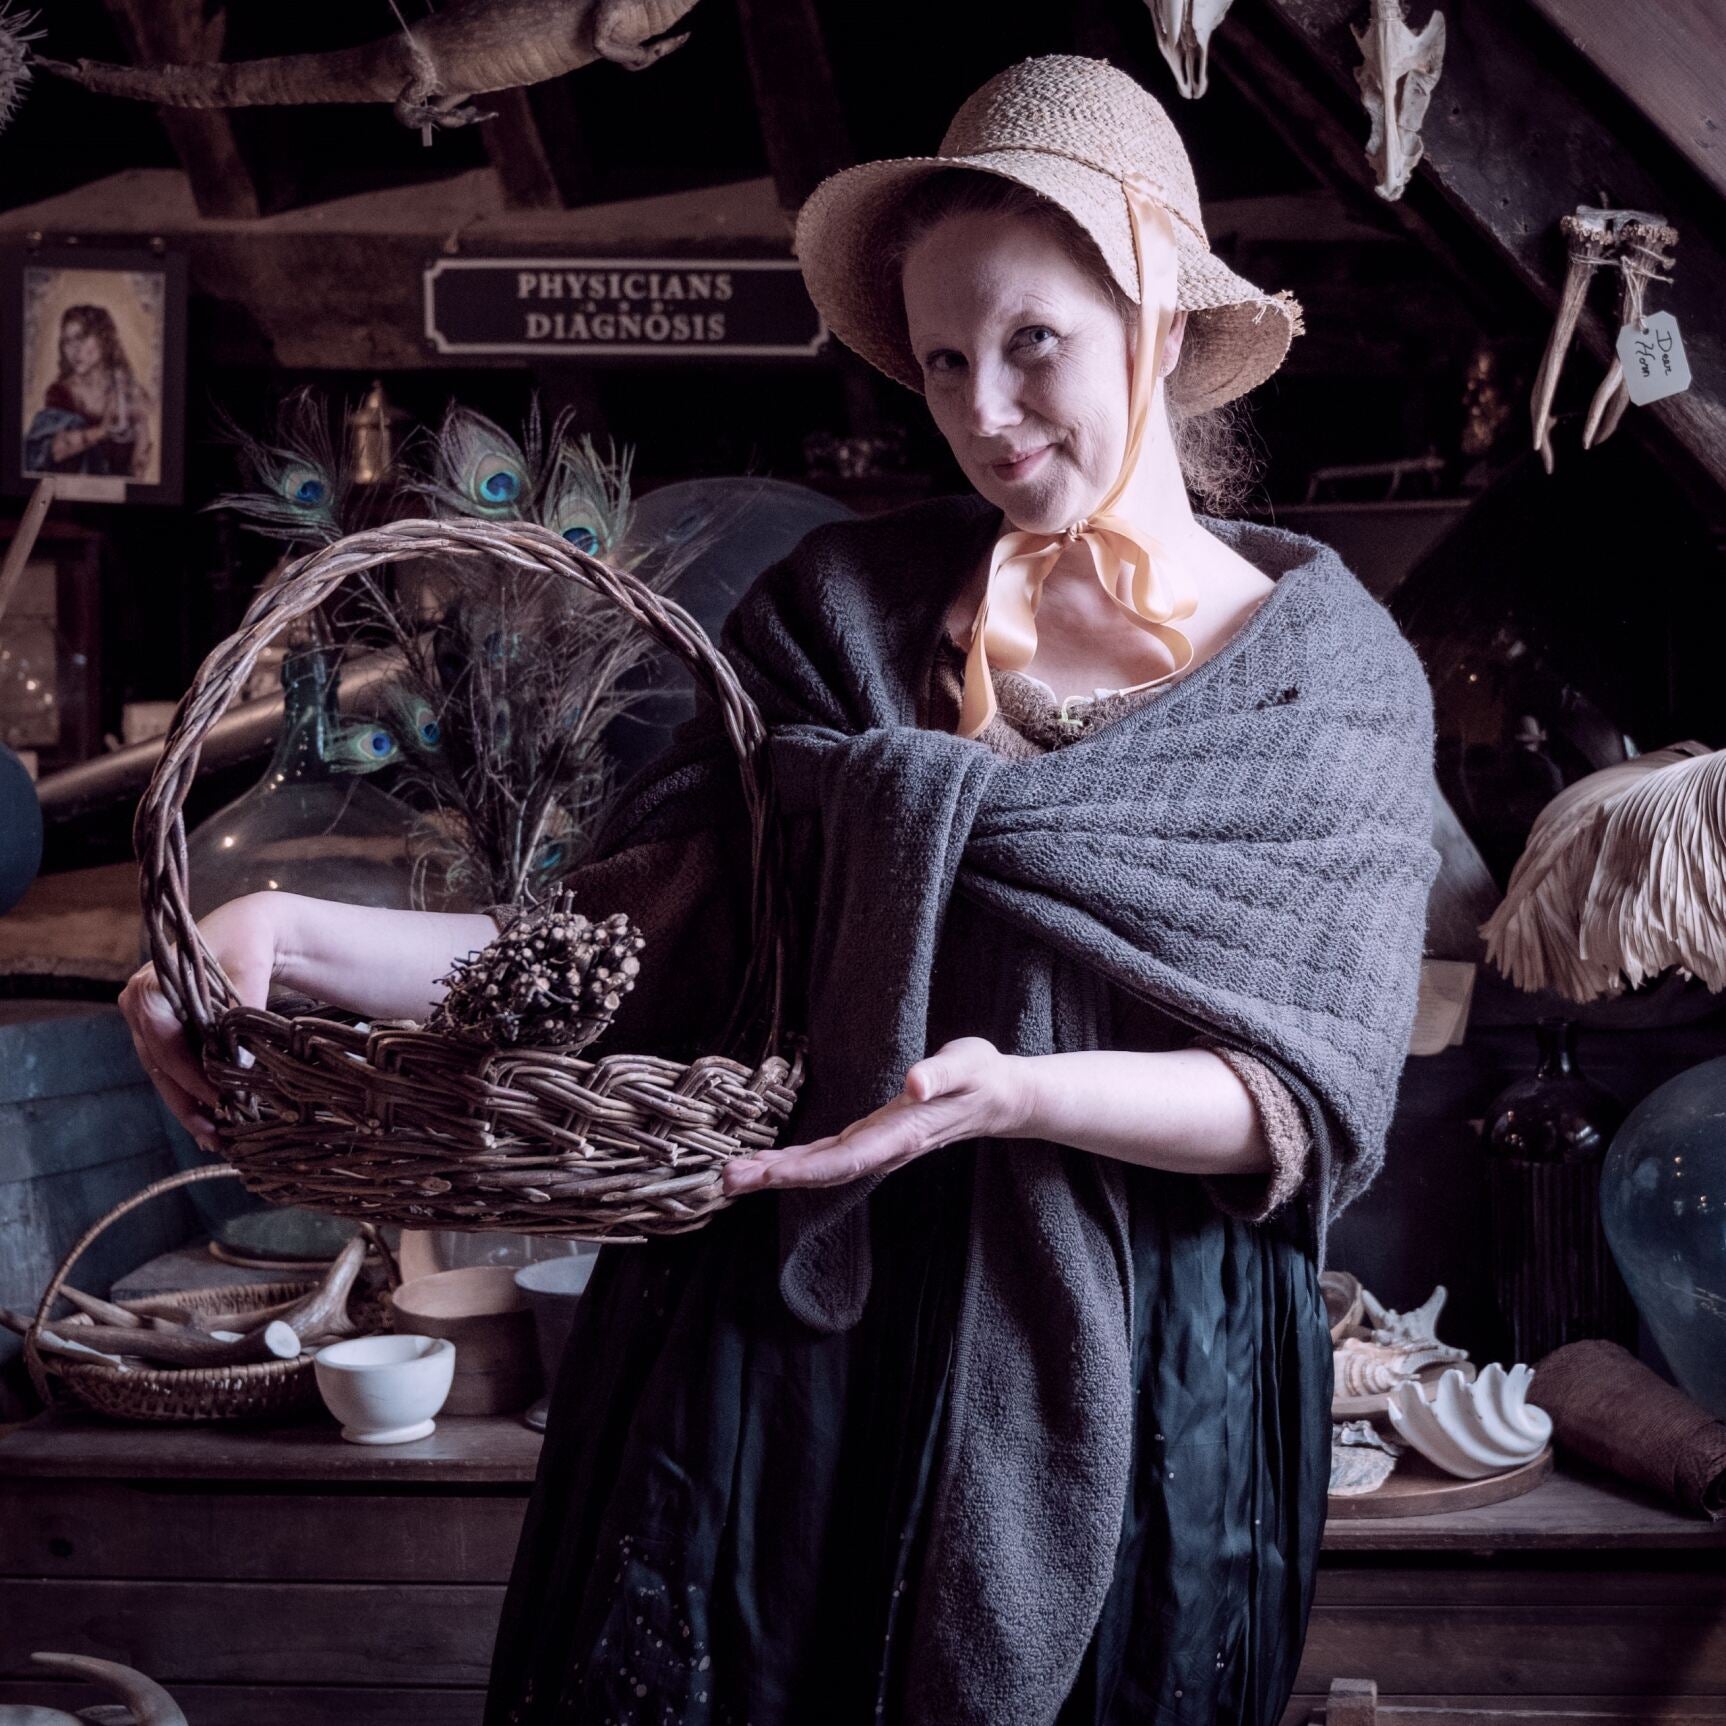 A woman wearing a shawl and bonnet holds up a wicker basket within the museum's herb garret